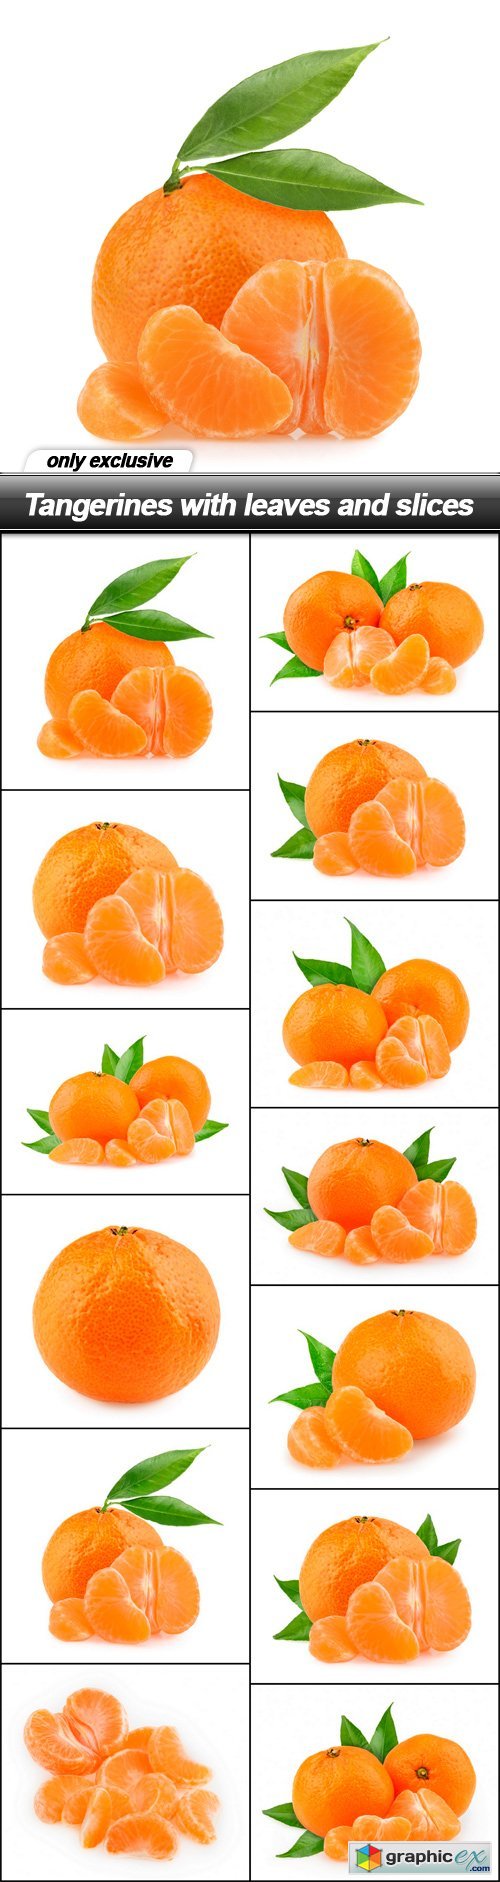 Tangerines with leaves and slices - 13 UHQ JPEG